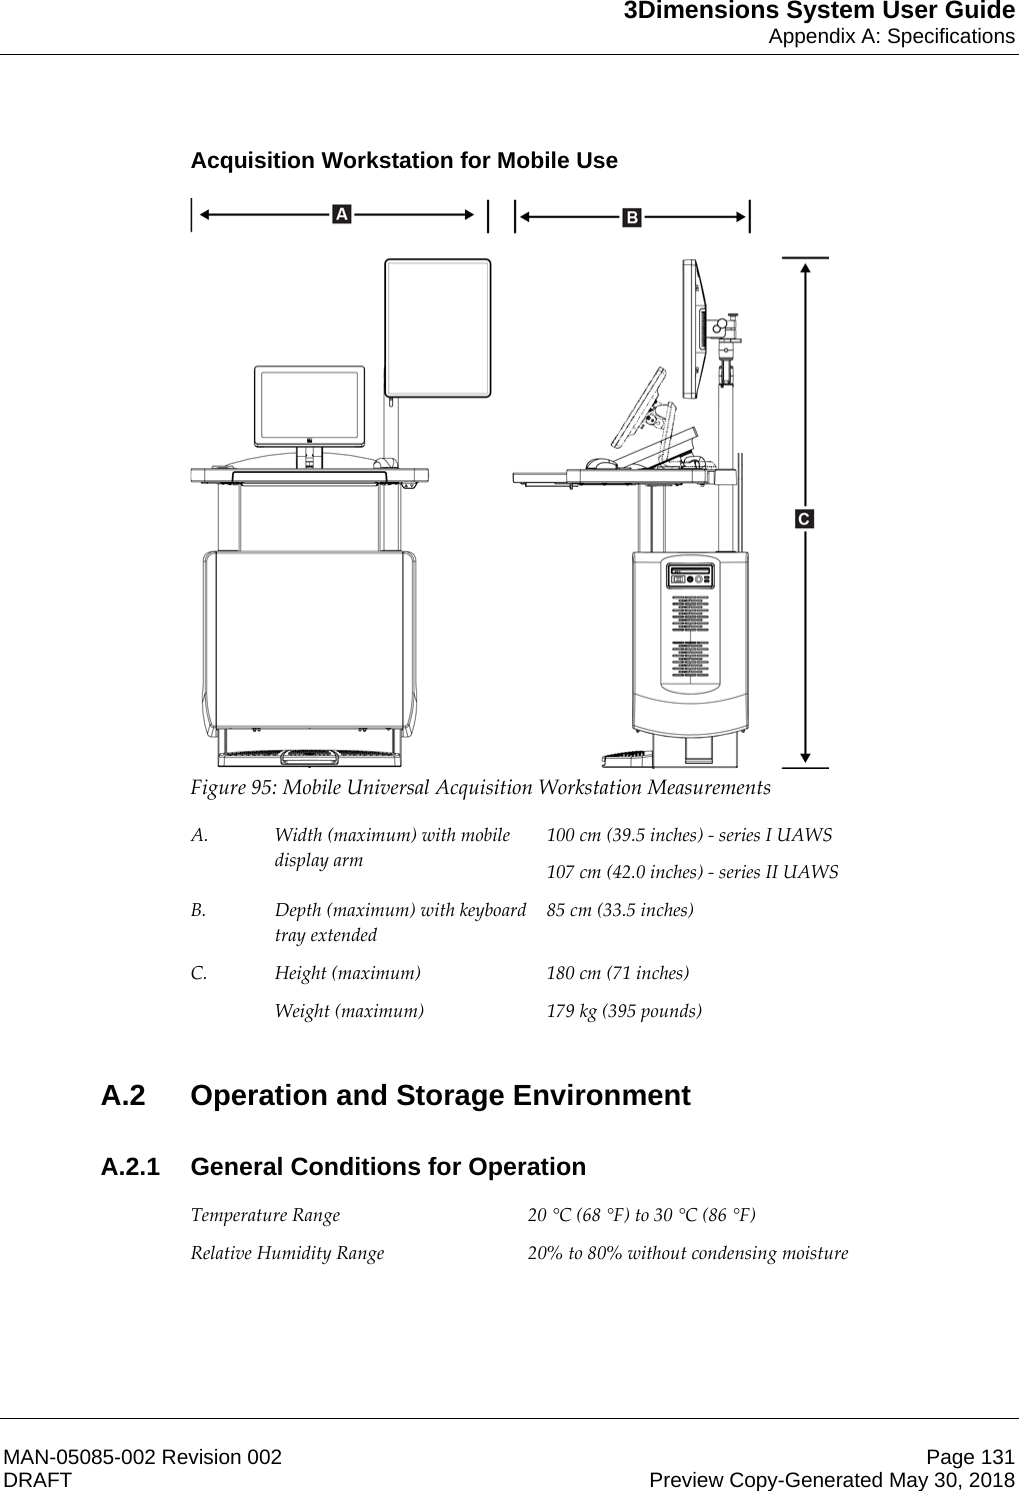 3Dimensions System User GuideAppendix A: SpecificationsMAN-05085-002 Revision 002 Page 131DRAFT Preview Copy-Generated May 30, 2018Acquisition Workstation for Mobile Use Figure 95: Mobile Universal Acquisition Workstation Measurements  A.  Width (maximum) with mobile display arm 100 cm (39.5 inches) - series I UAWS 107 cm (42.0 inches) - series II UAWS B.  Depth (maximum) with keyboard tray extended 85 cm (33.5 inches) C.  Height (maximum)  180 cm (71 inches)  Weight (maximum)  179 kg (395 pounds)  A.2  Operation and Storage EnvironmentA.2.1  General Conditions for Operation Temperature Range  20 °C (68 °F) to 30 °C (86 °F) Relative Humidity Range  20% to 80% without condensing moisture  